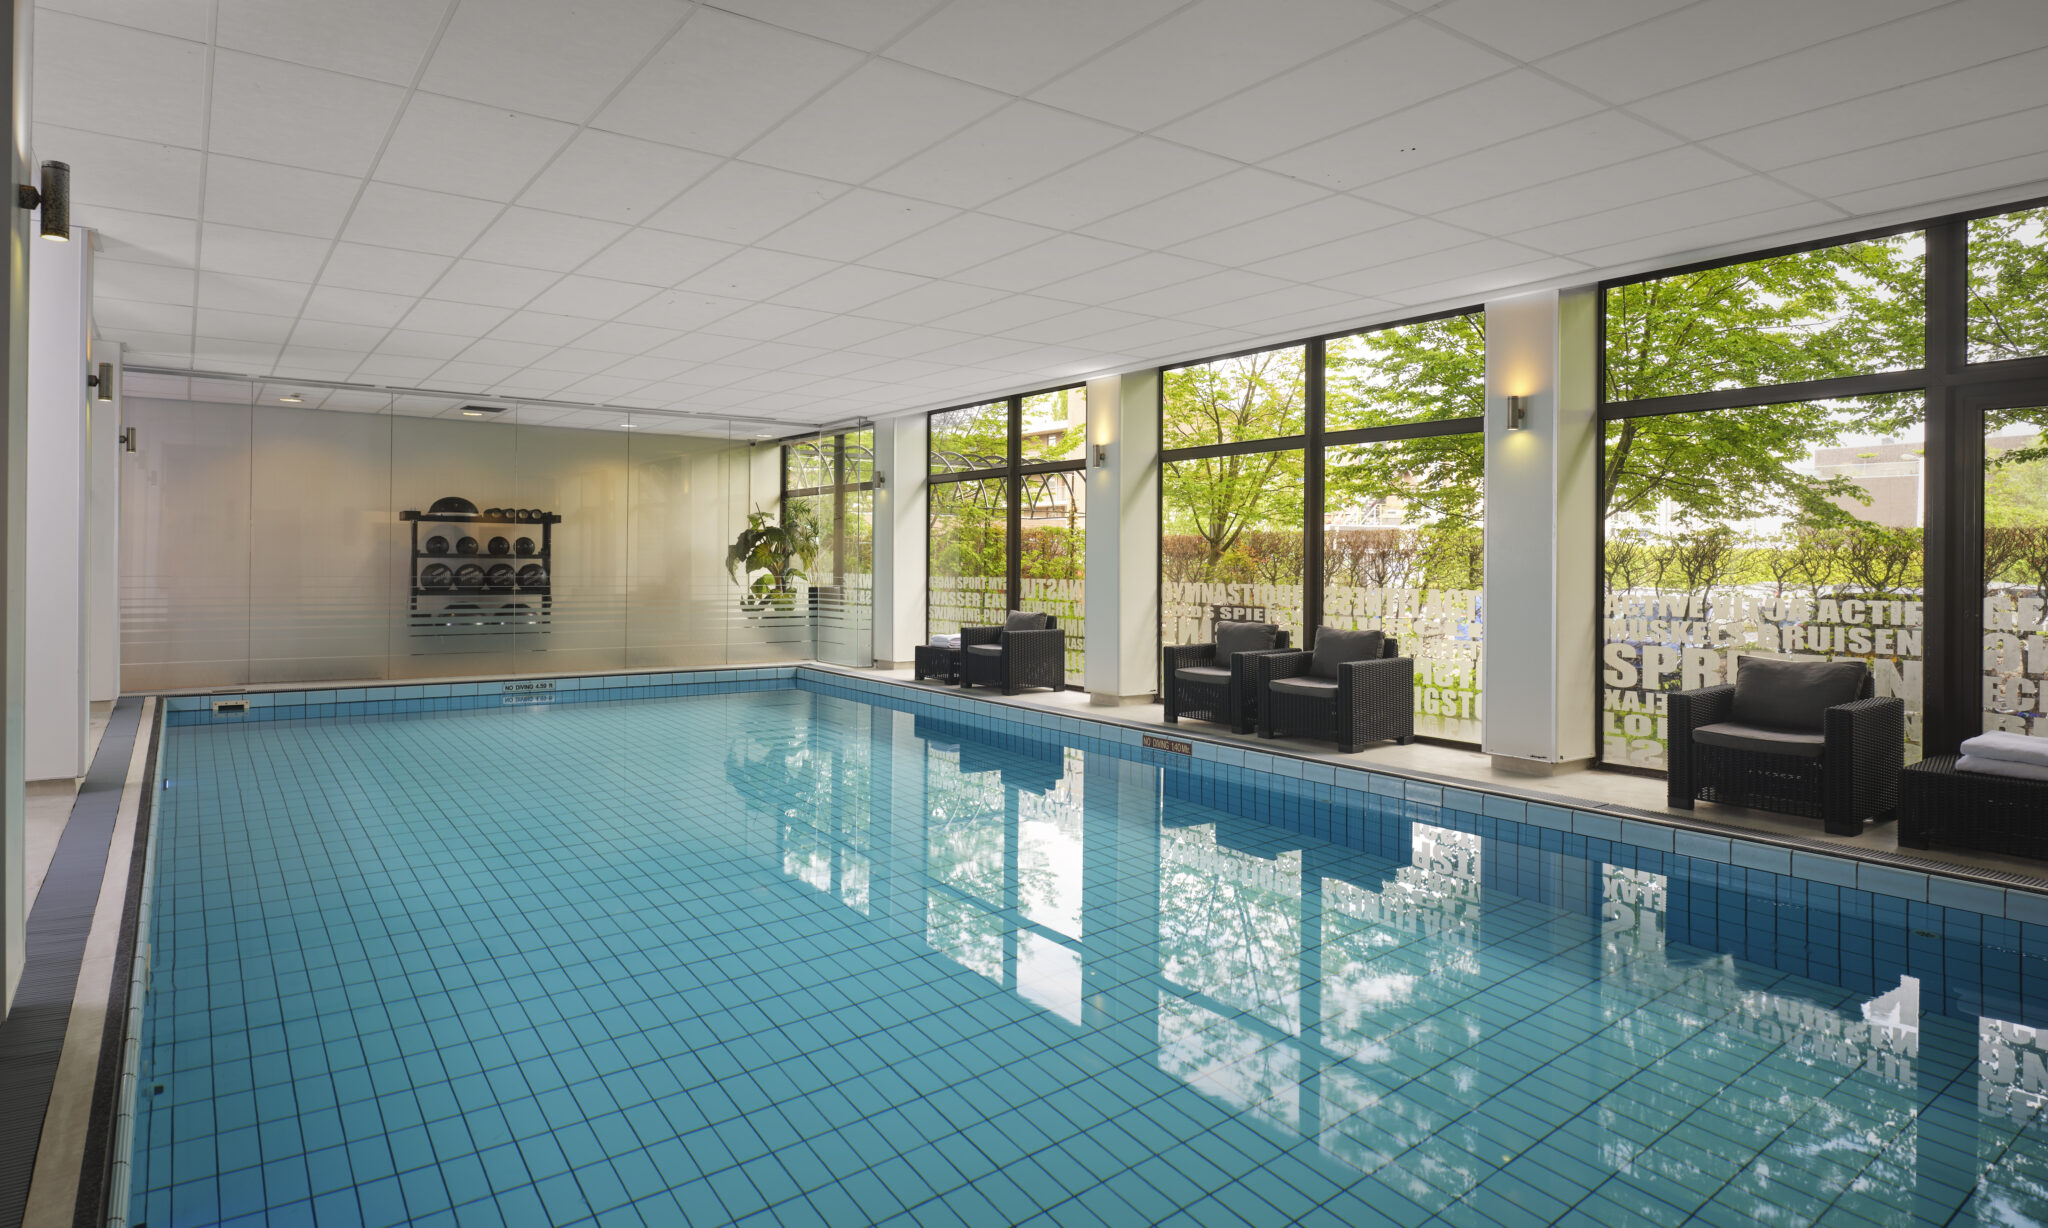 Park Plaza Eindhoven fitness and fun gym and pool area